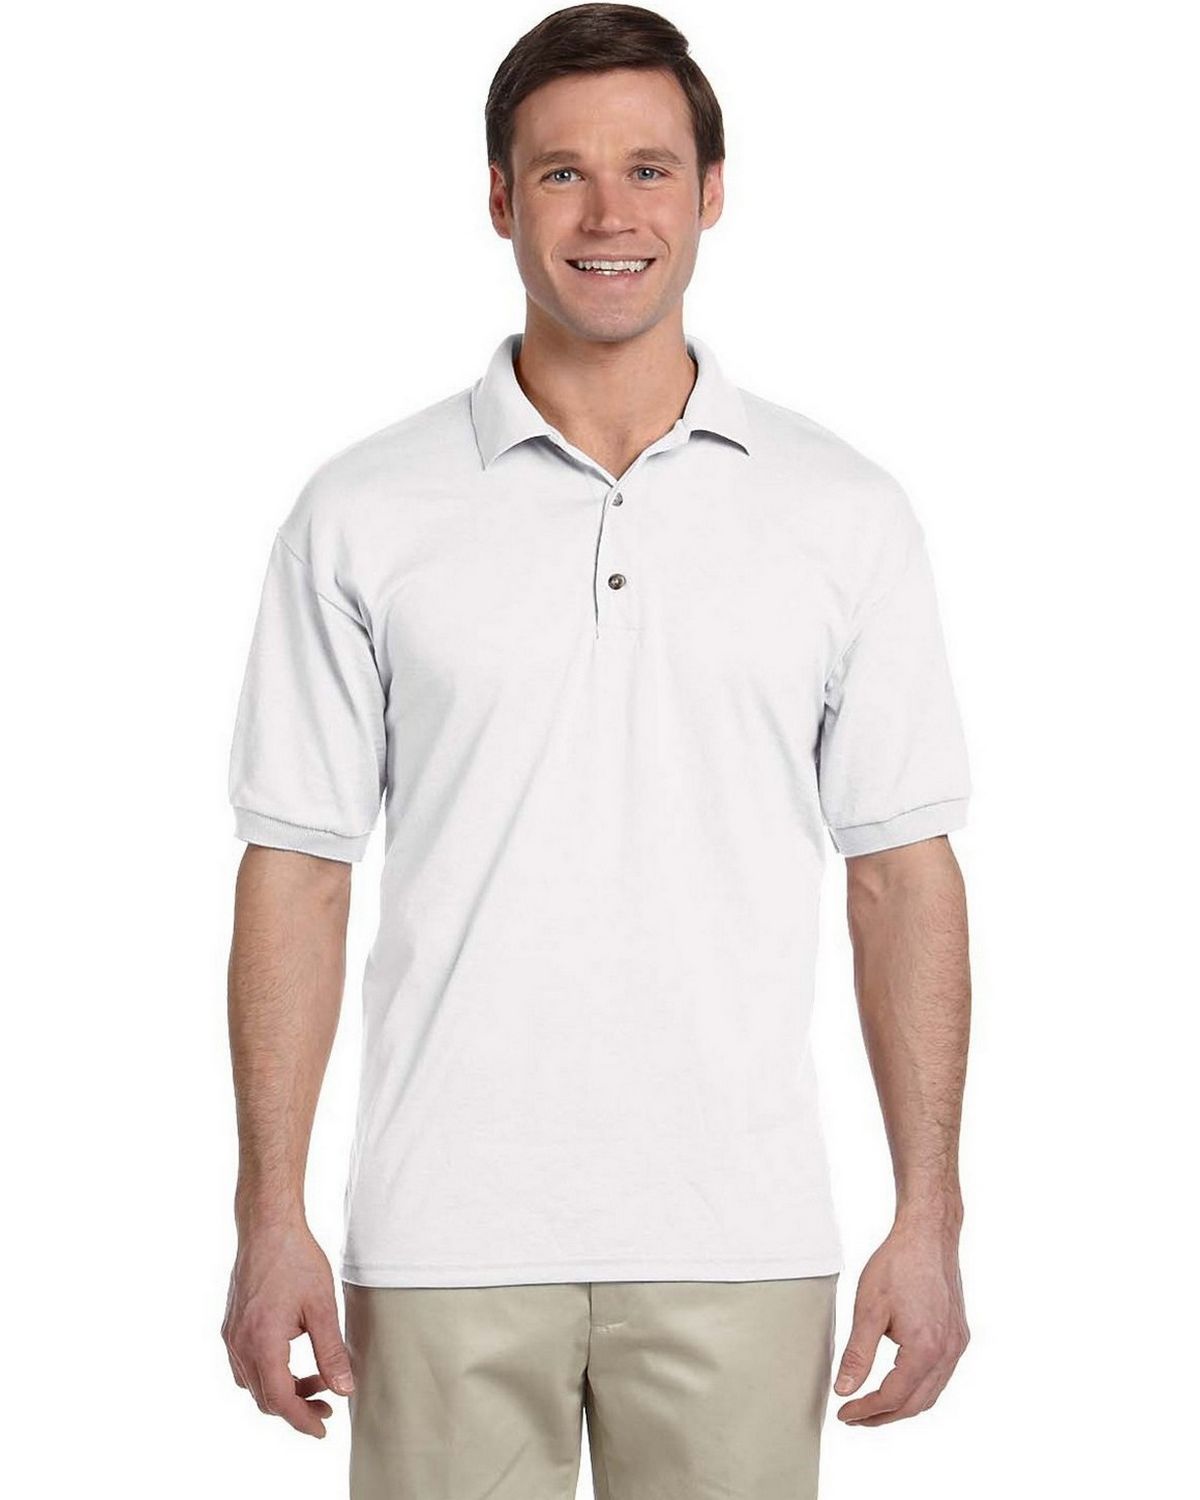 system You're welcome mixer Shop Men's and Women's Wholesale Gildan Polo Sports Shirts